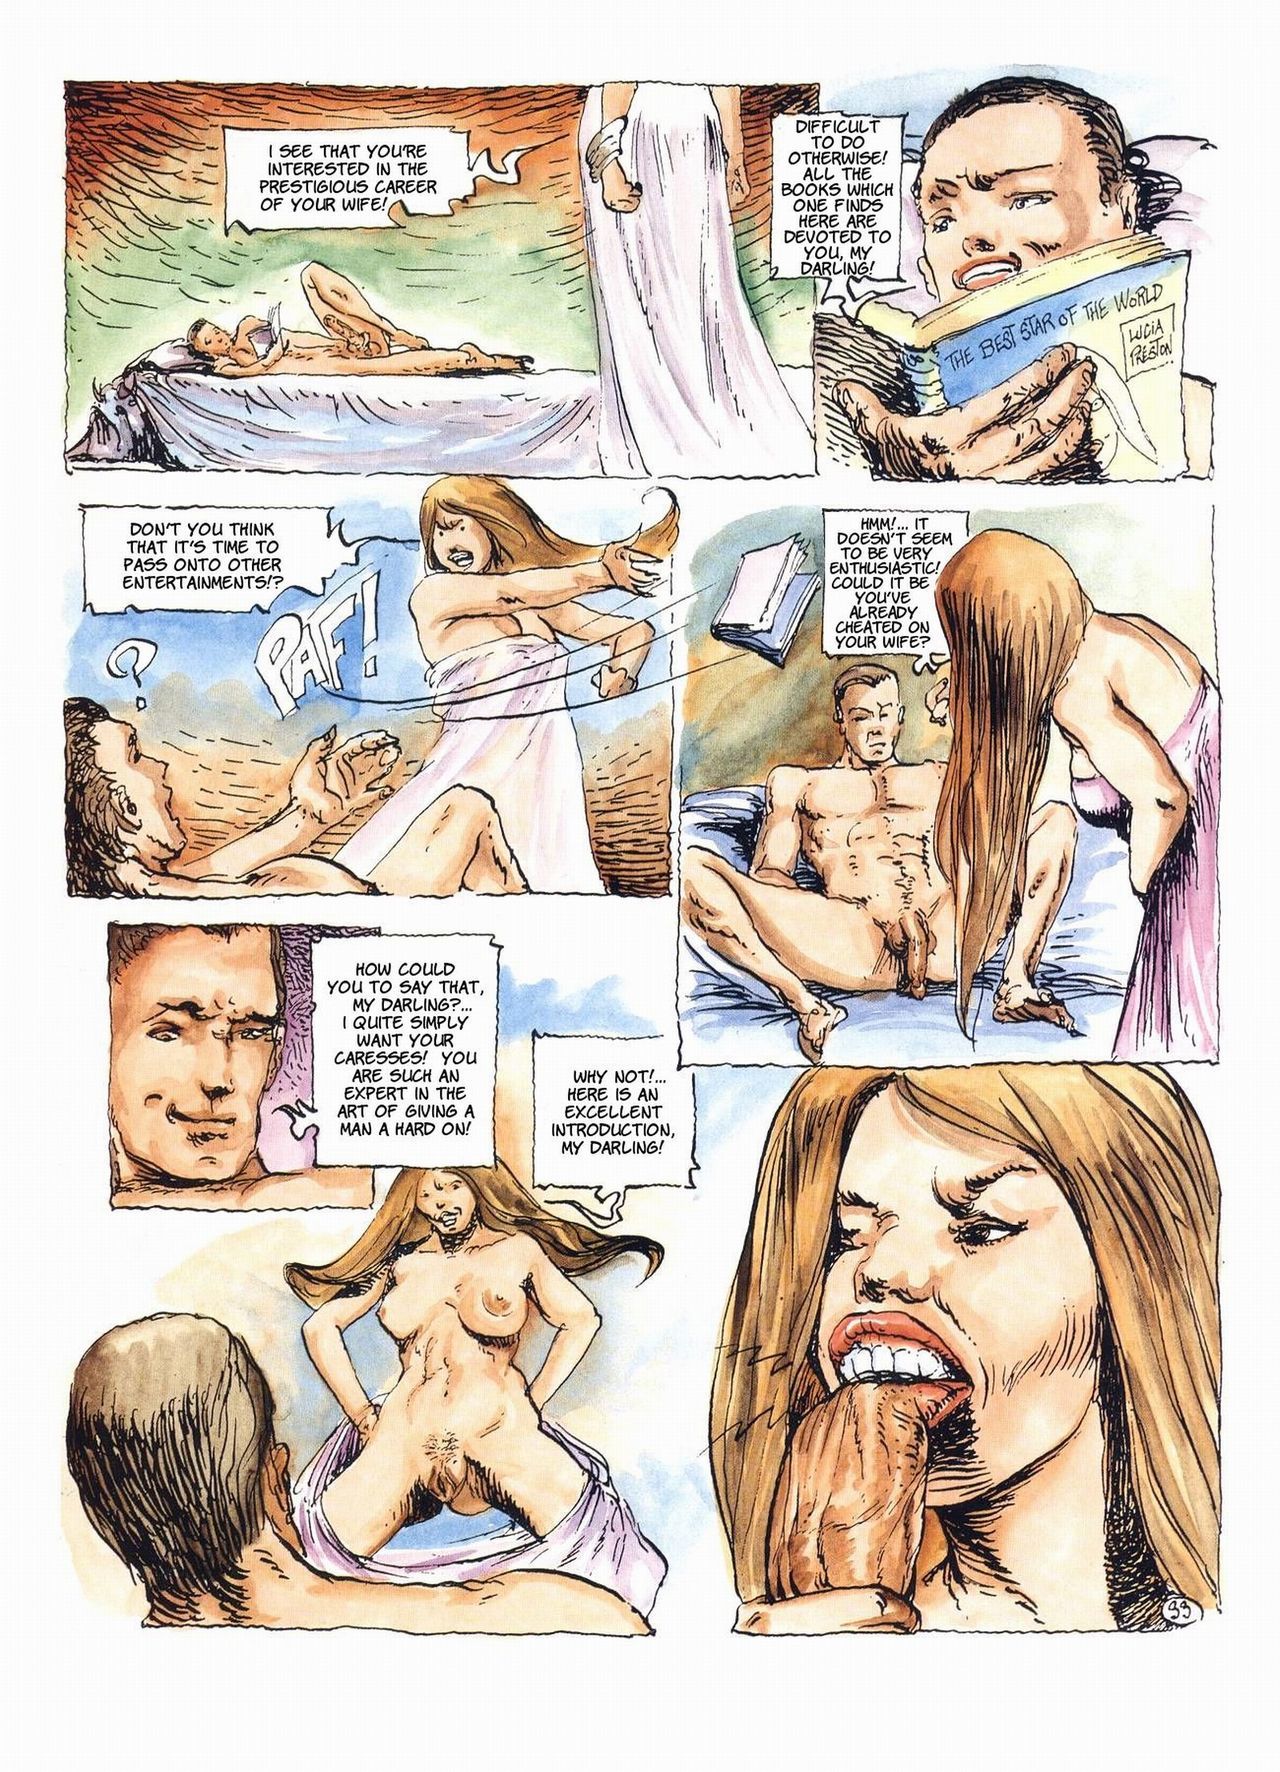 The Island Of Perversions Peter Riverstone page 33